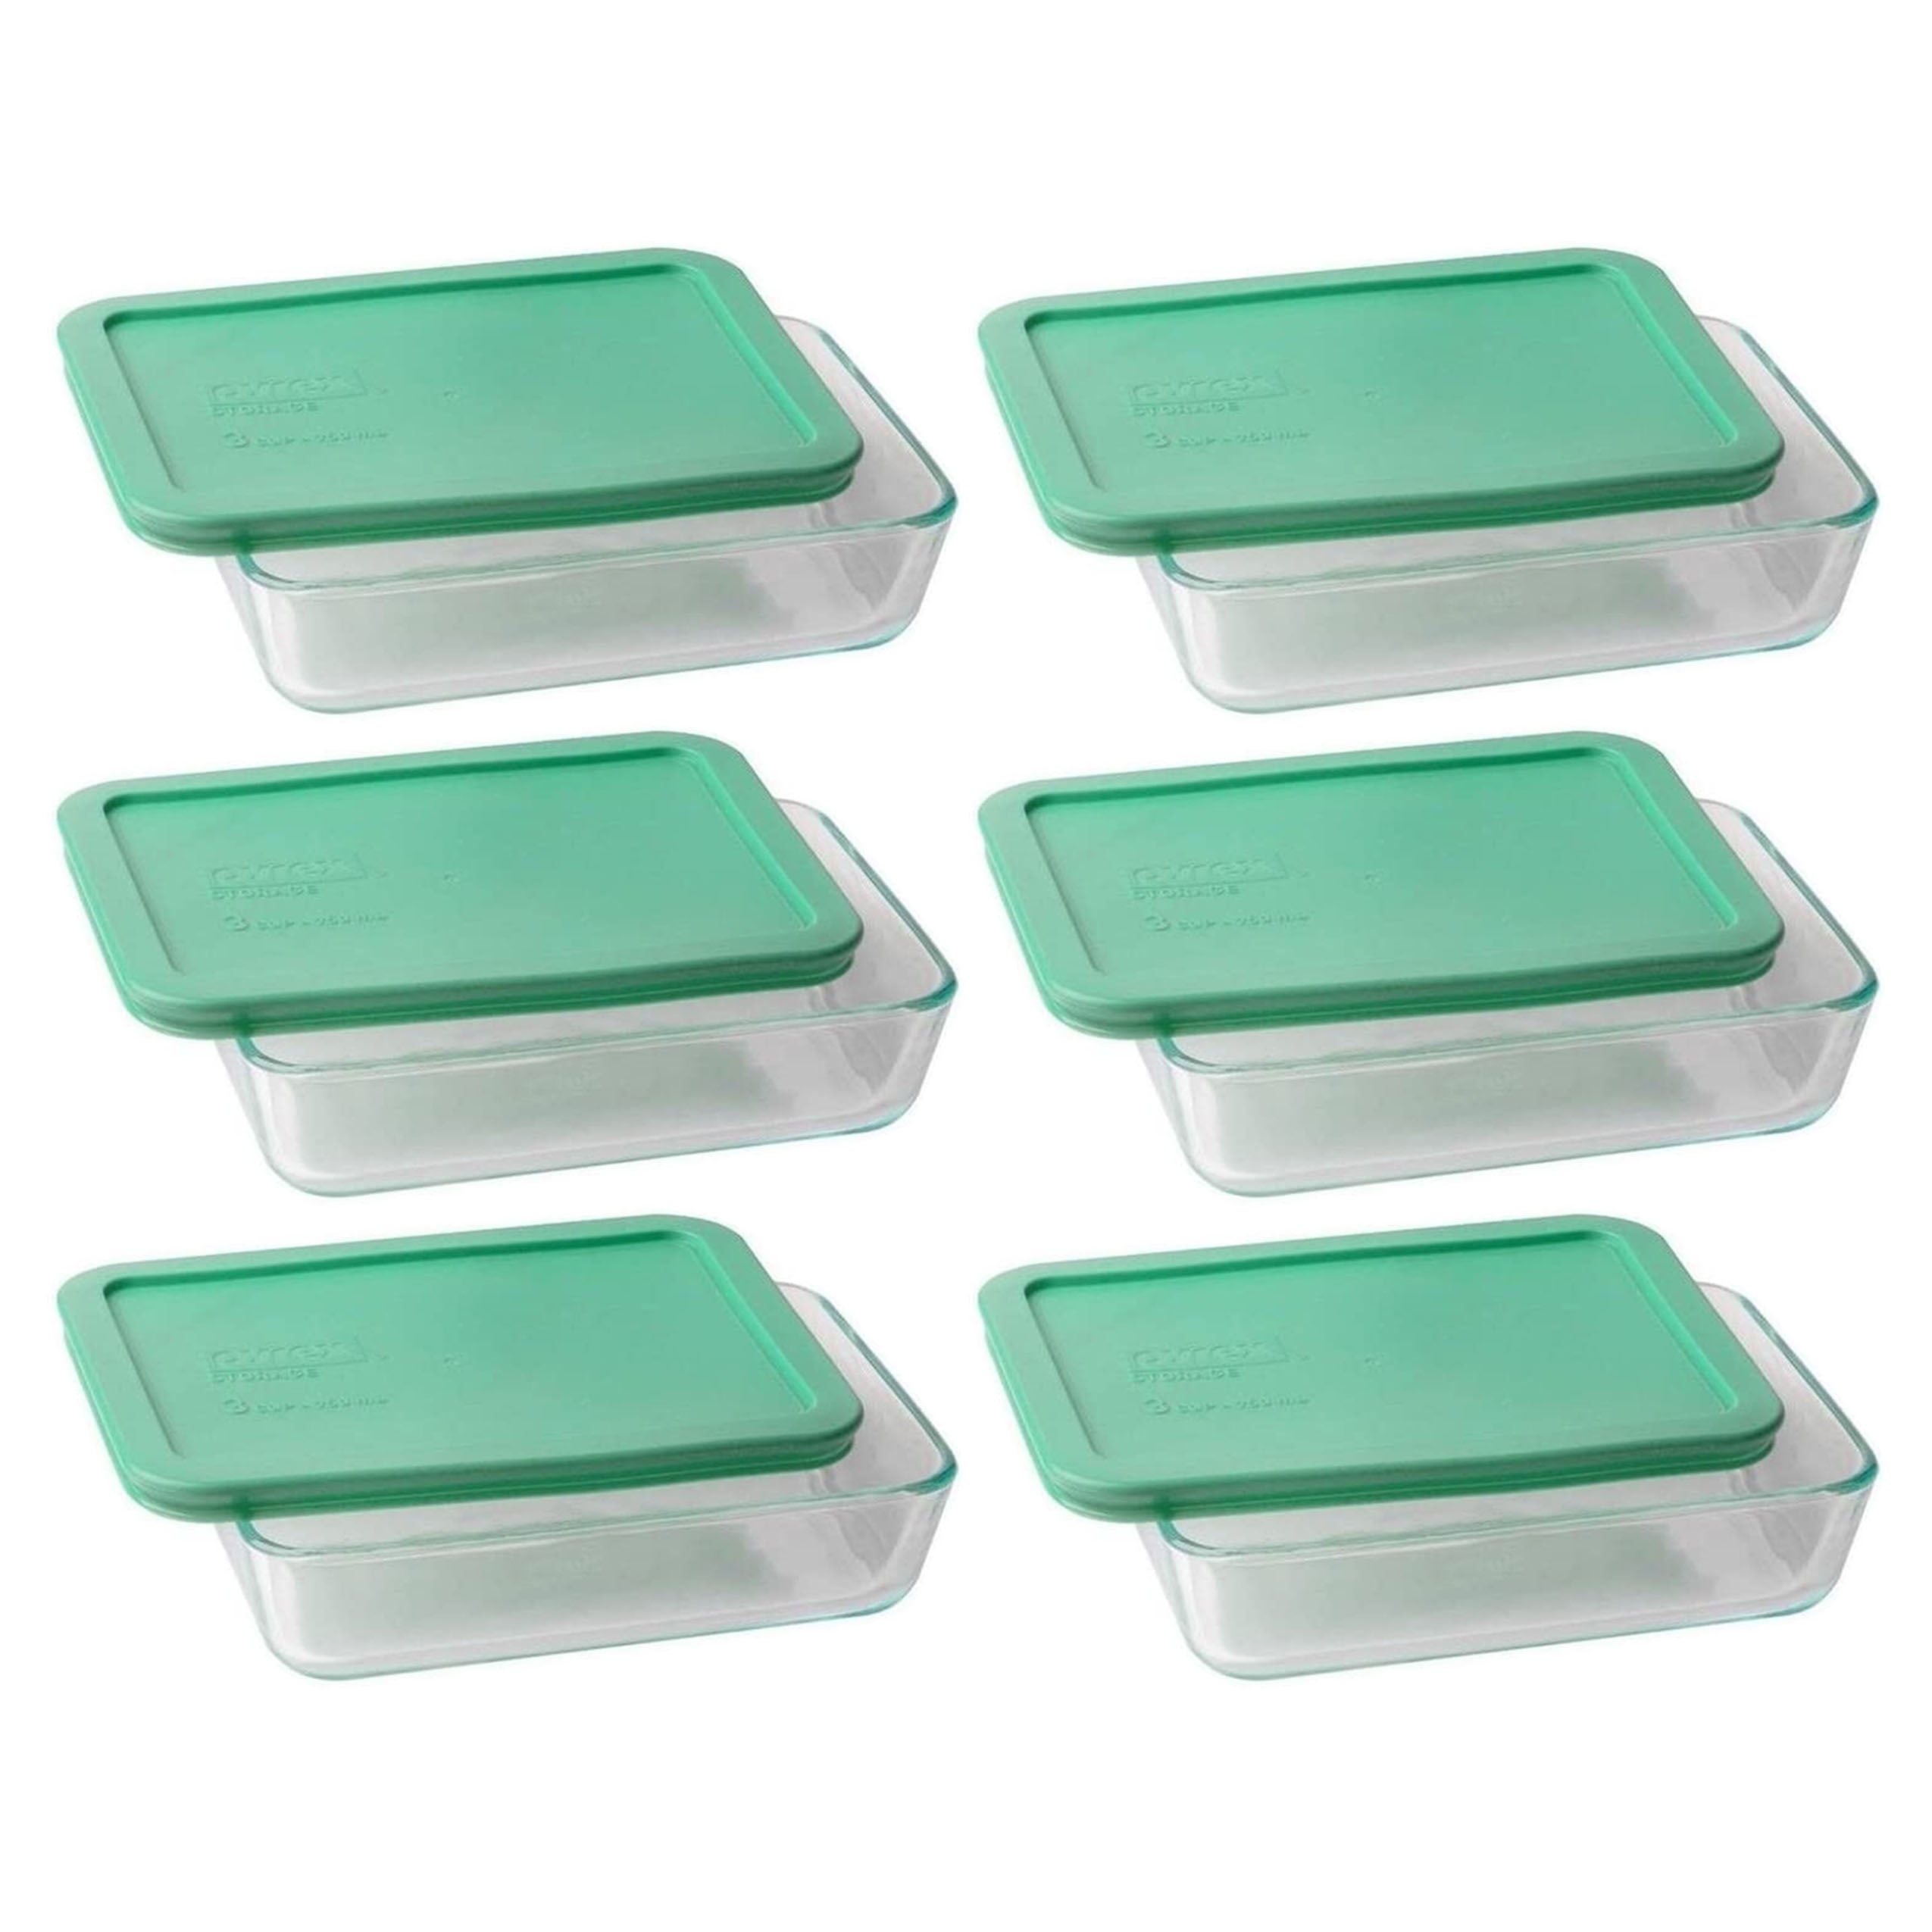  Pyrex 3-cup Rectangle Glass Food Storage Containers With White Plastic  Lids.Use For Lunch Box, Storage Food,And Baking Dish (pack of 6 Glass  Containers)) Made in the USA